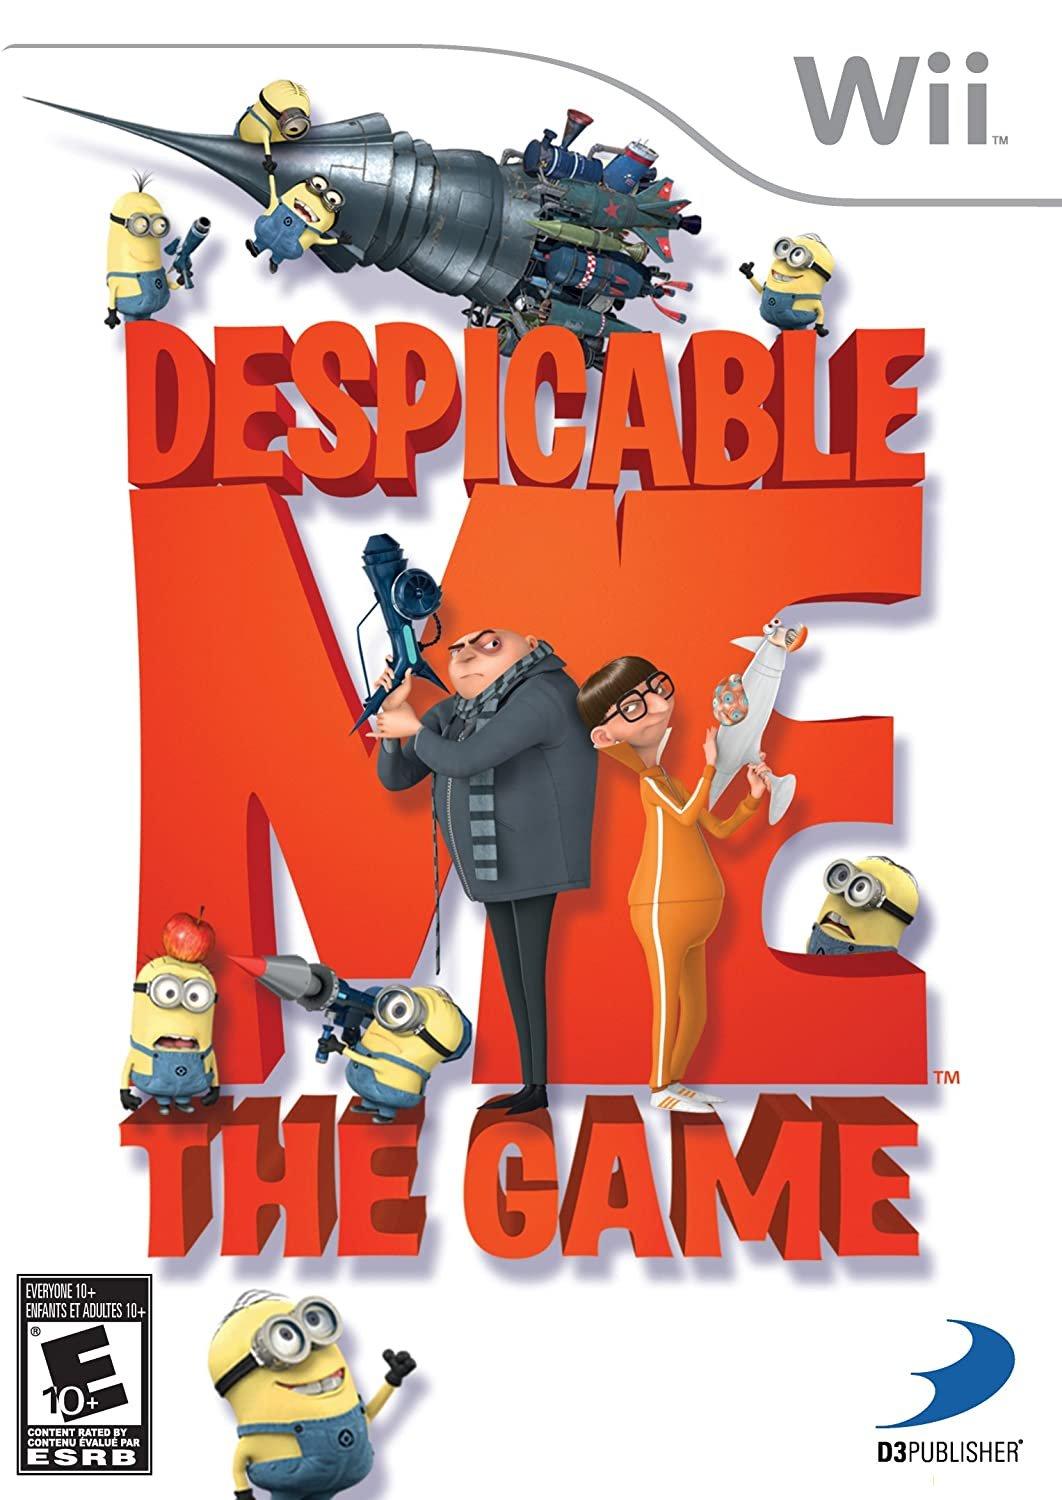 Despicable Me Pre Owned Nintendo Wii Games D3 Publisher Of America Gamestop Fandom Shop - despicable me gru jacke and scarf shirt roblox